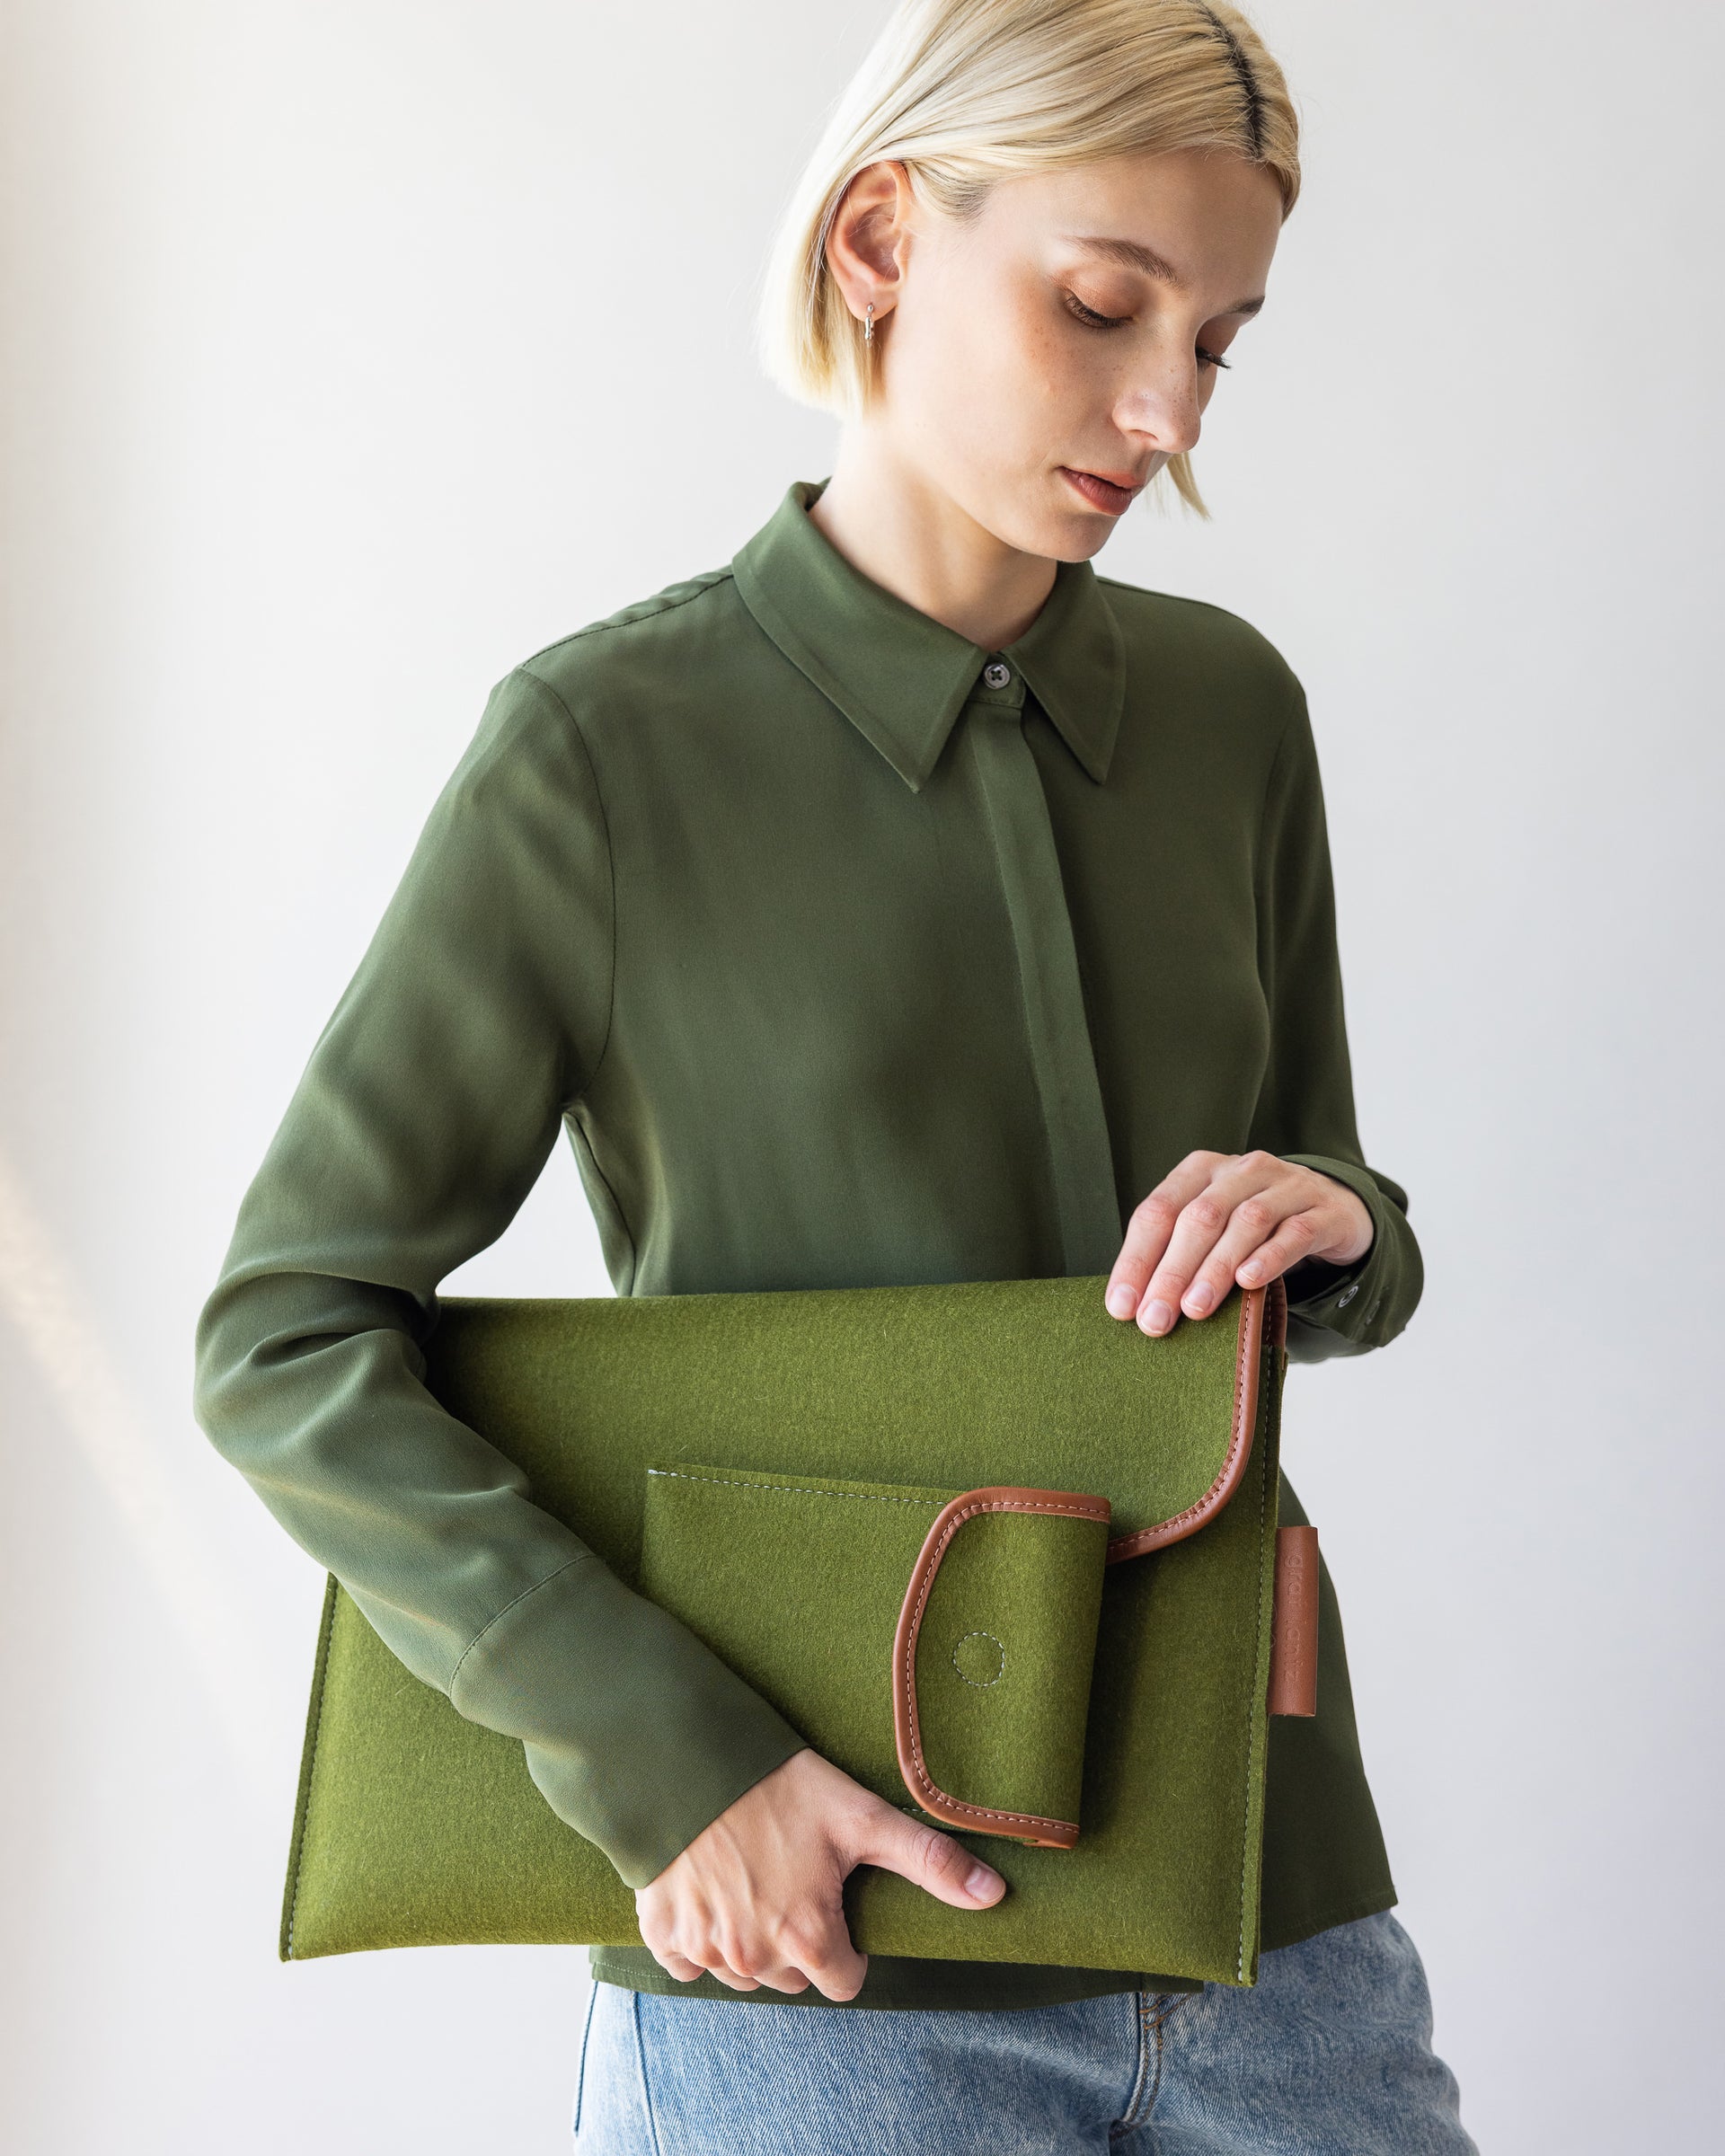 Envelope Merino Wool 16" Tech Sleeve and Envelope Accessory Sleeve in green held by a stylish woman in one hand by her side